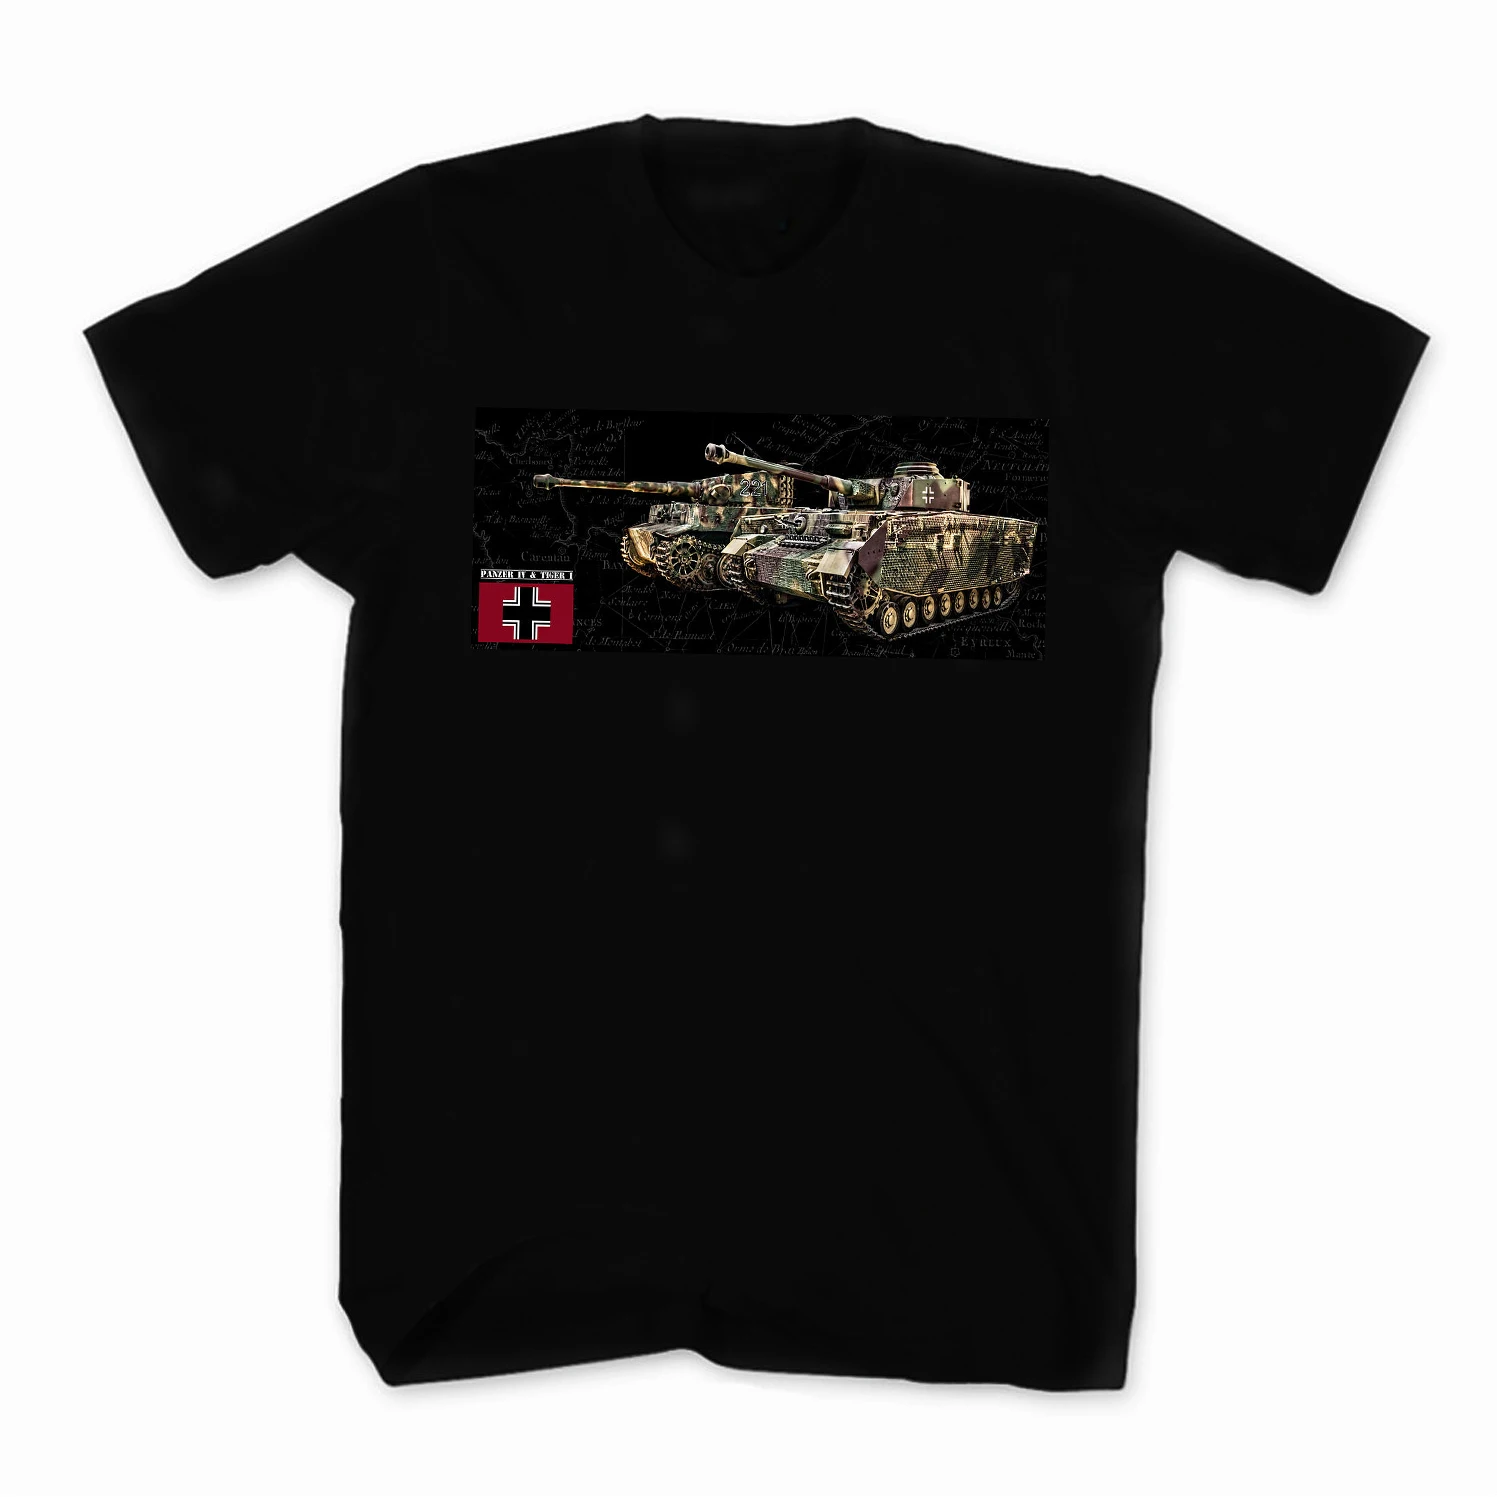 

Wehrmacht Panzer IV And Tiger Tanks T Shirt. New 100% Cotton Short Sleeve O-Neck Casual T-shirts Loose Top Size S-3XL